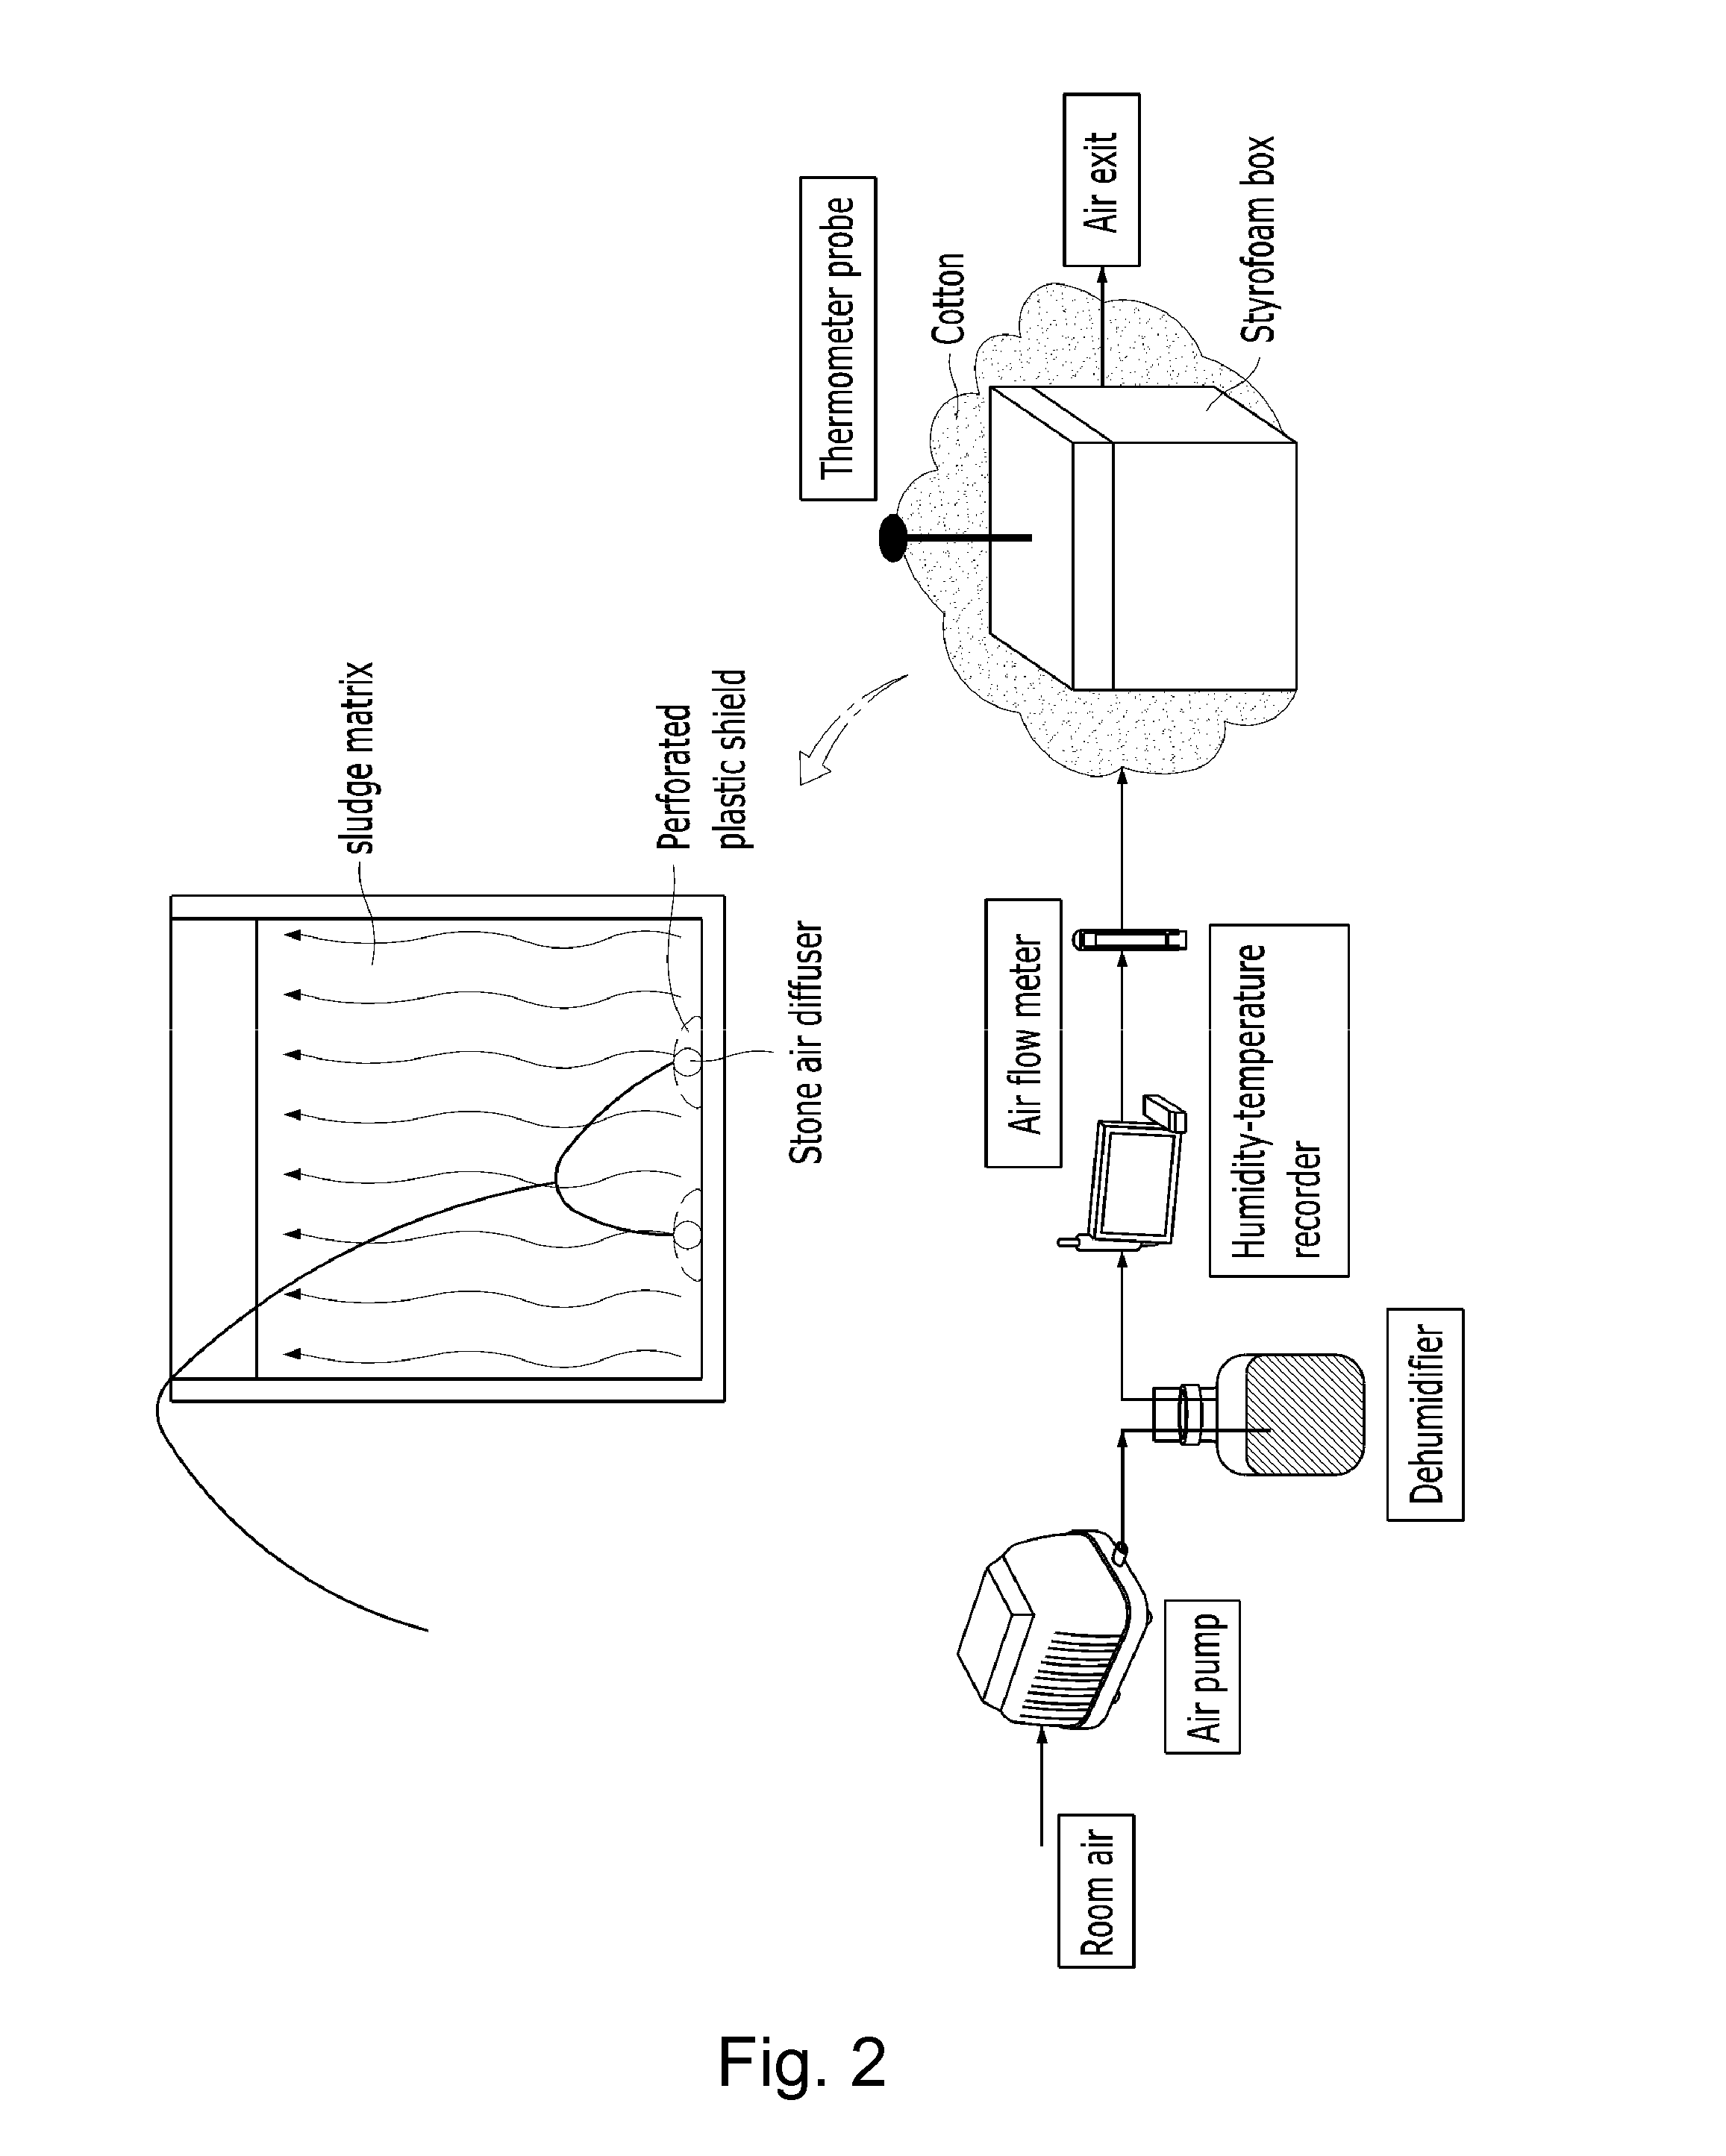 Method for zero-discharge treatment of high-concentration organic wastewater via bioevaporation